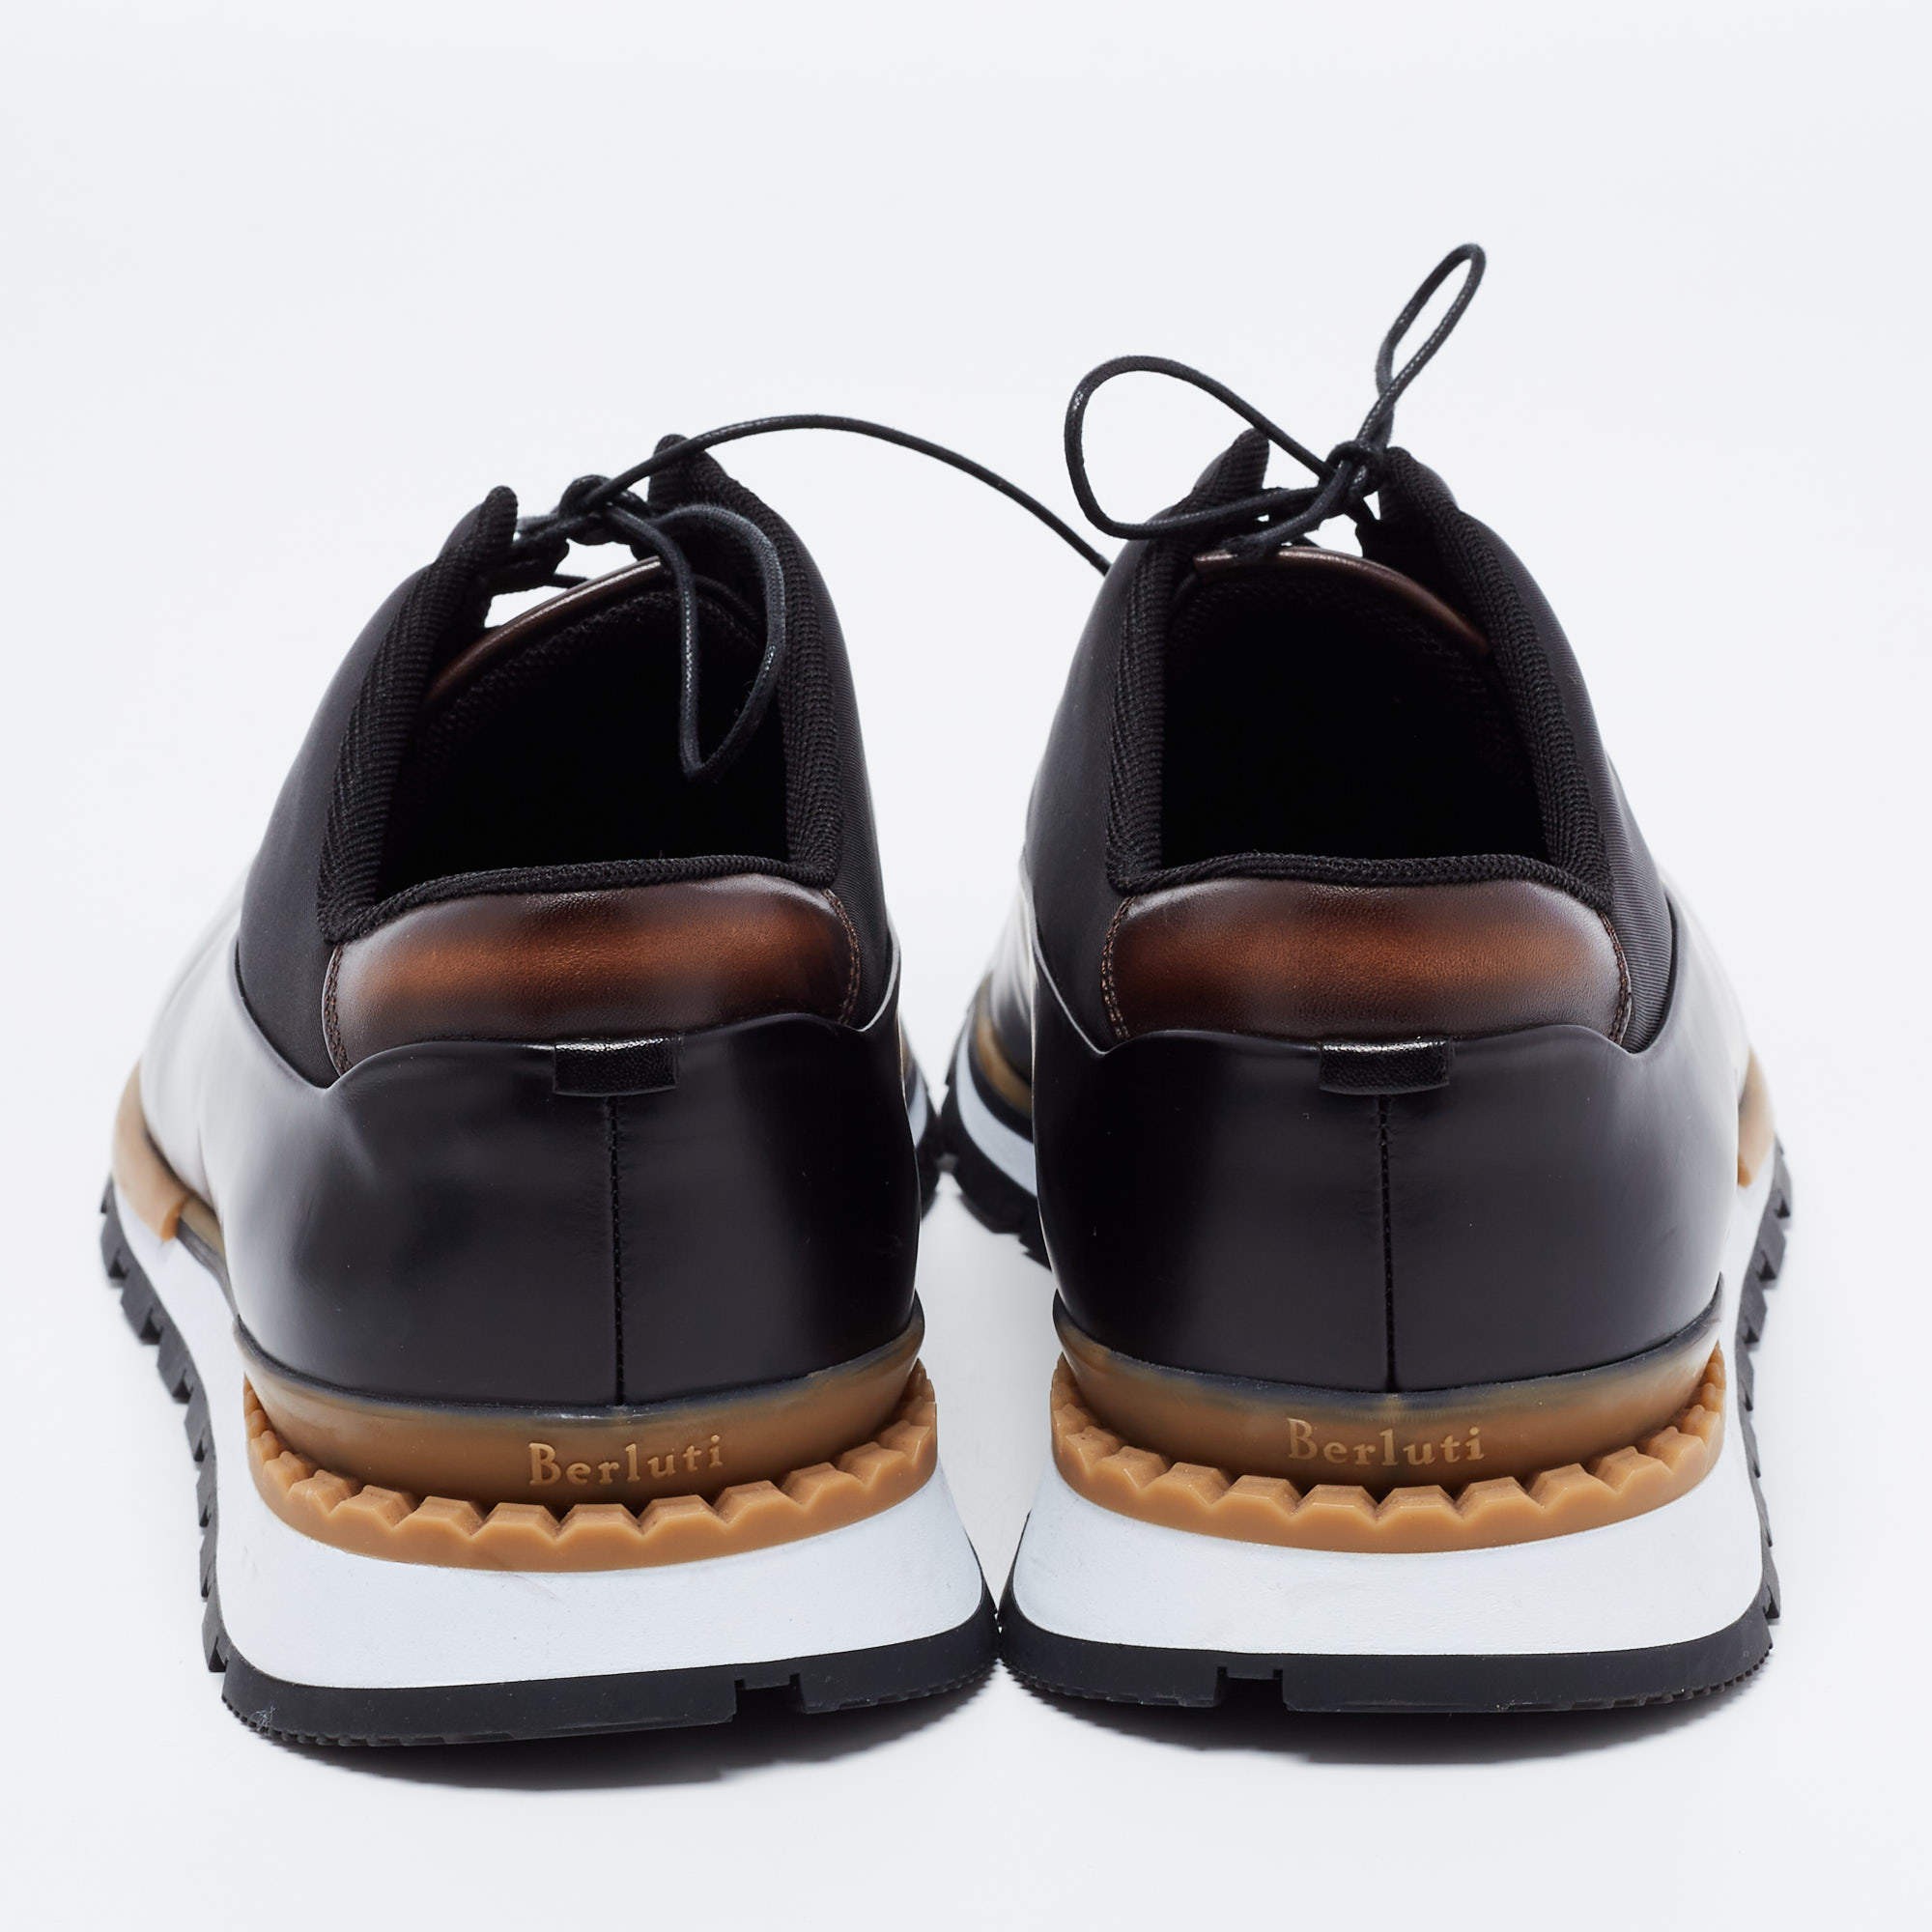 Berluti Authenticated Leather Lace Ups